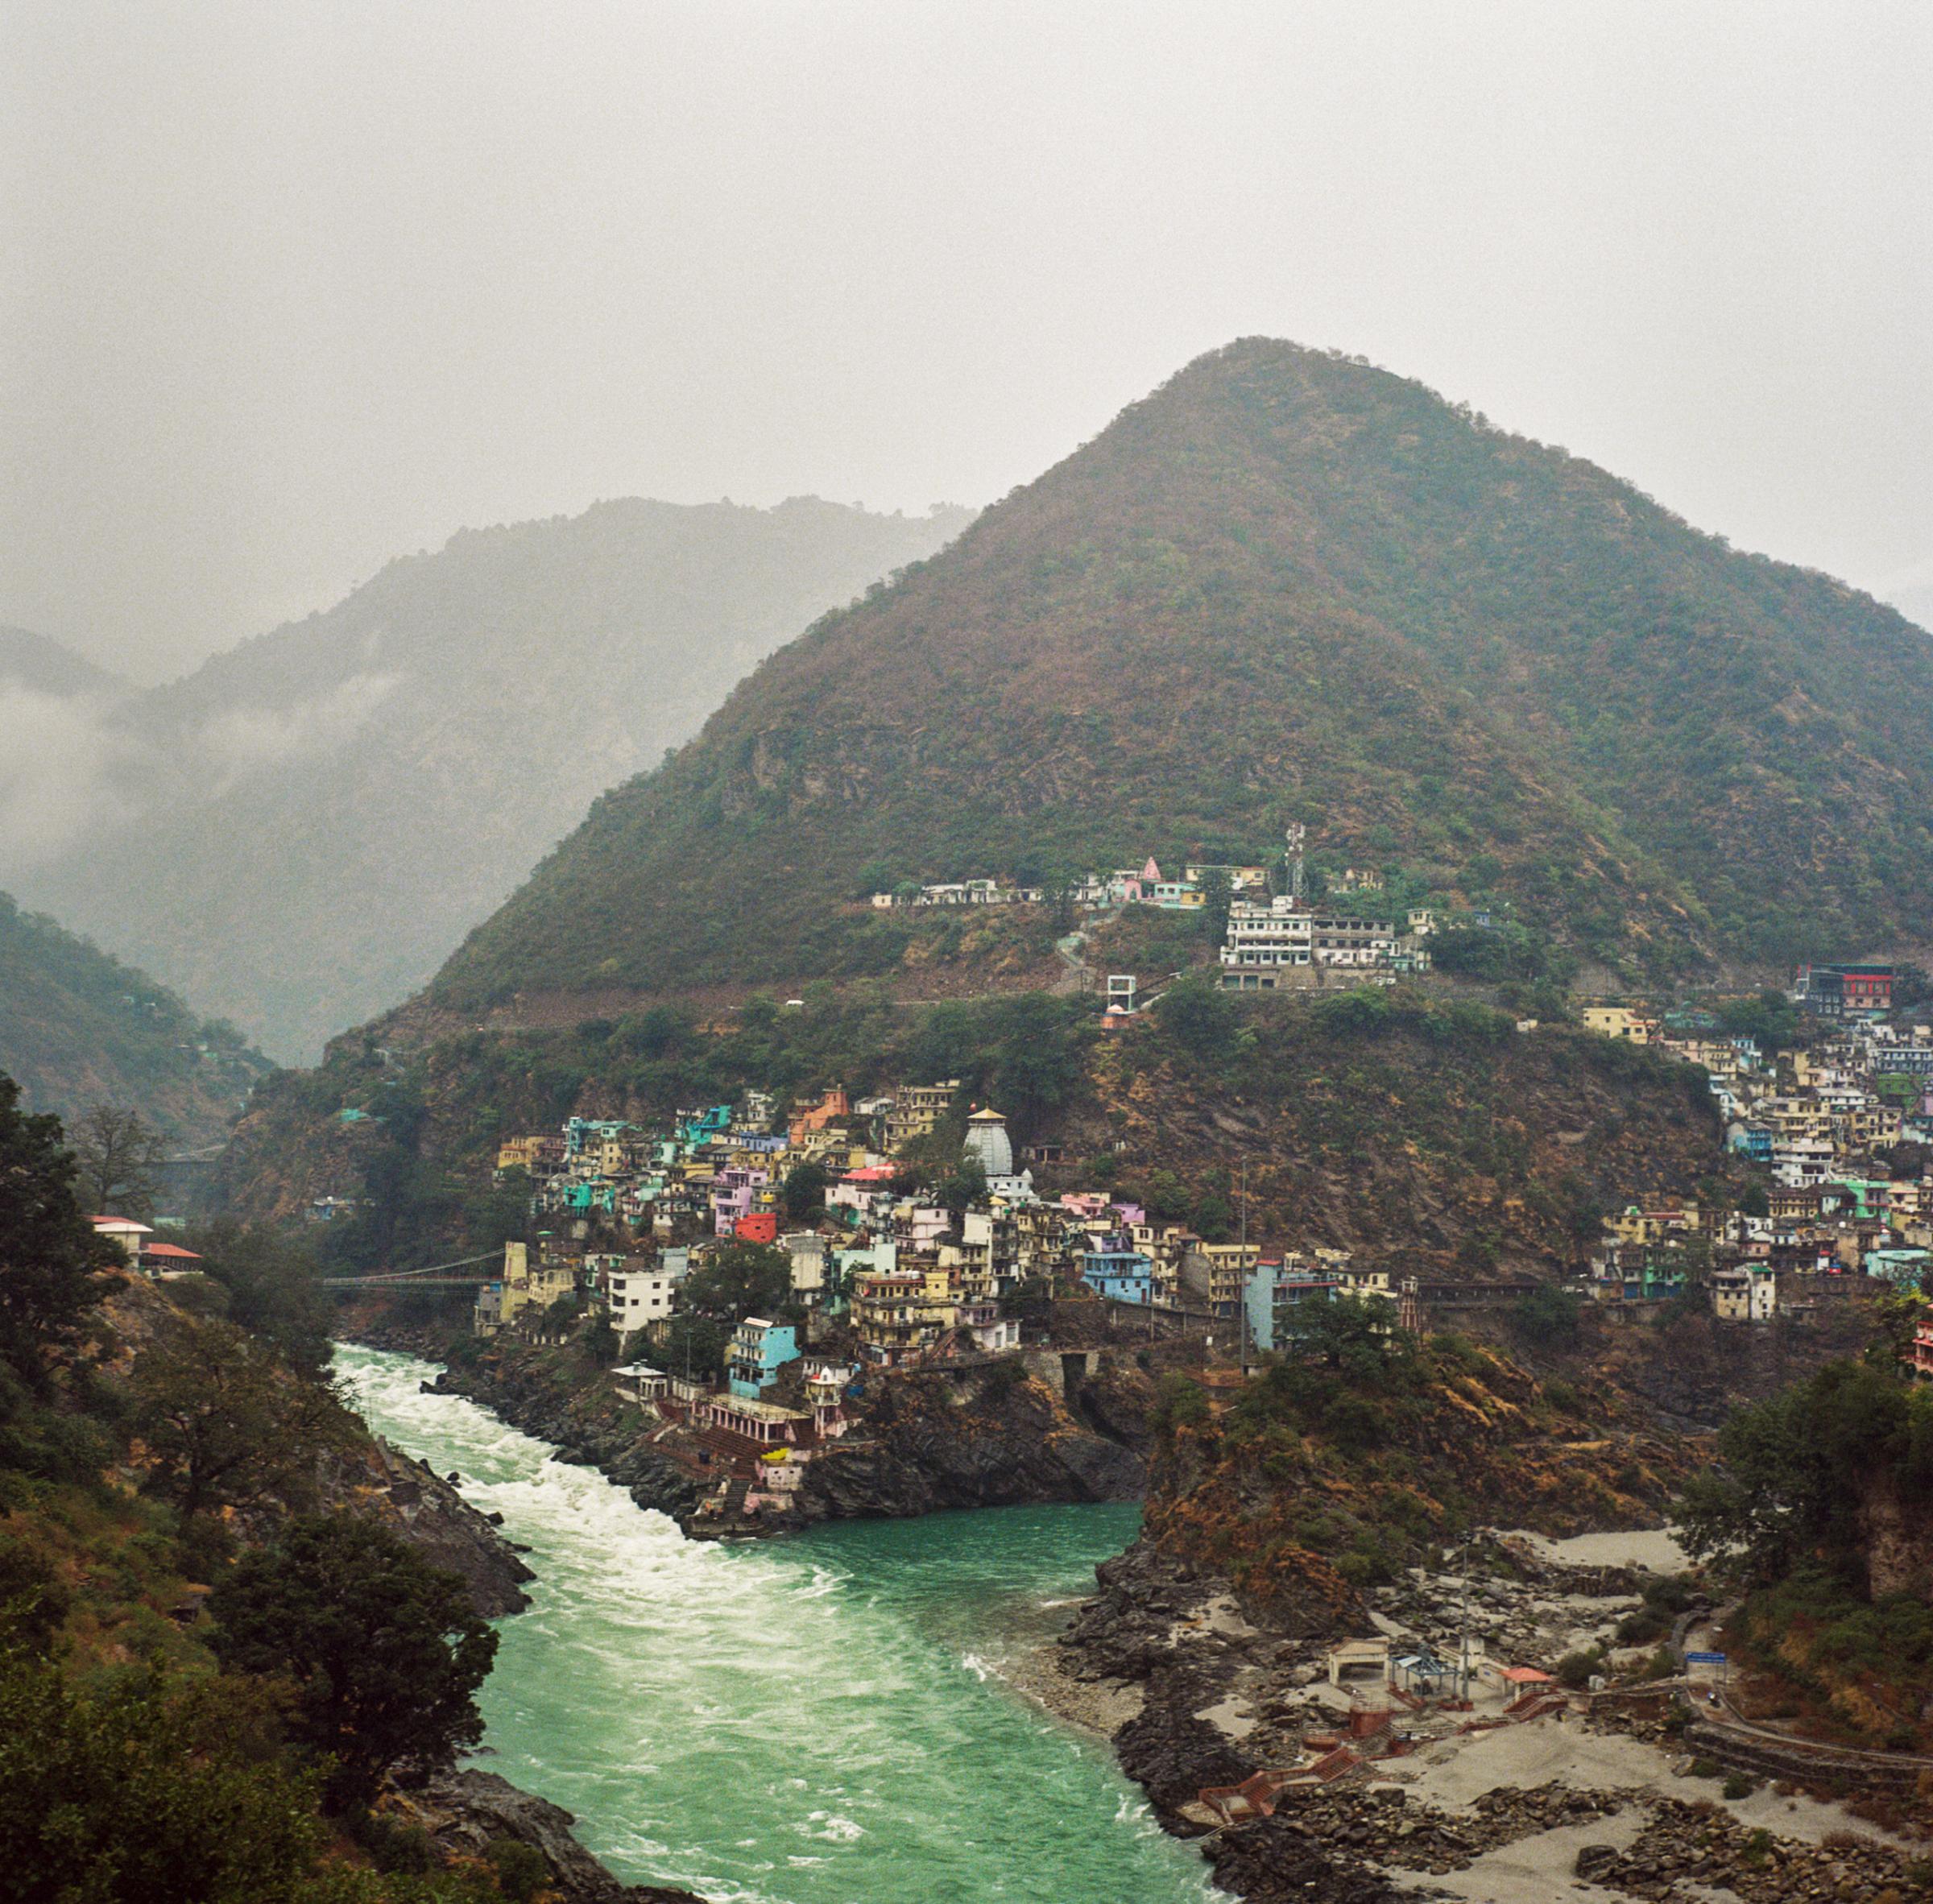 Two rivers, the Bhagirathi and the Alaknanda, converge in the western Himalaya to form the Ganges, at the Indian town of Devaprayag&mdash;Sanskrit for &ldquo;holy confluence.&rdquo; The amount of plastic waste flowing out of the Ganges is estimated at more than 6,000 tons a year.